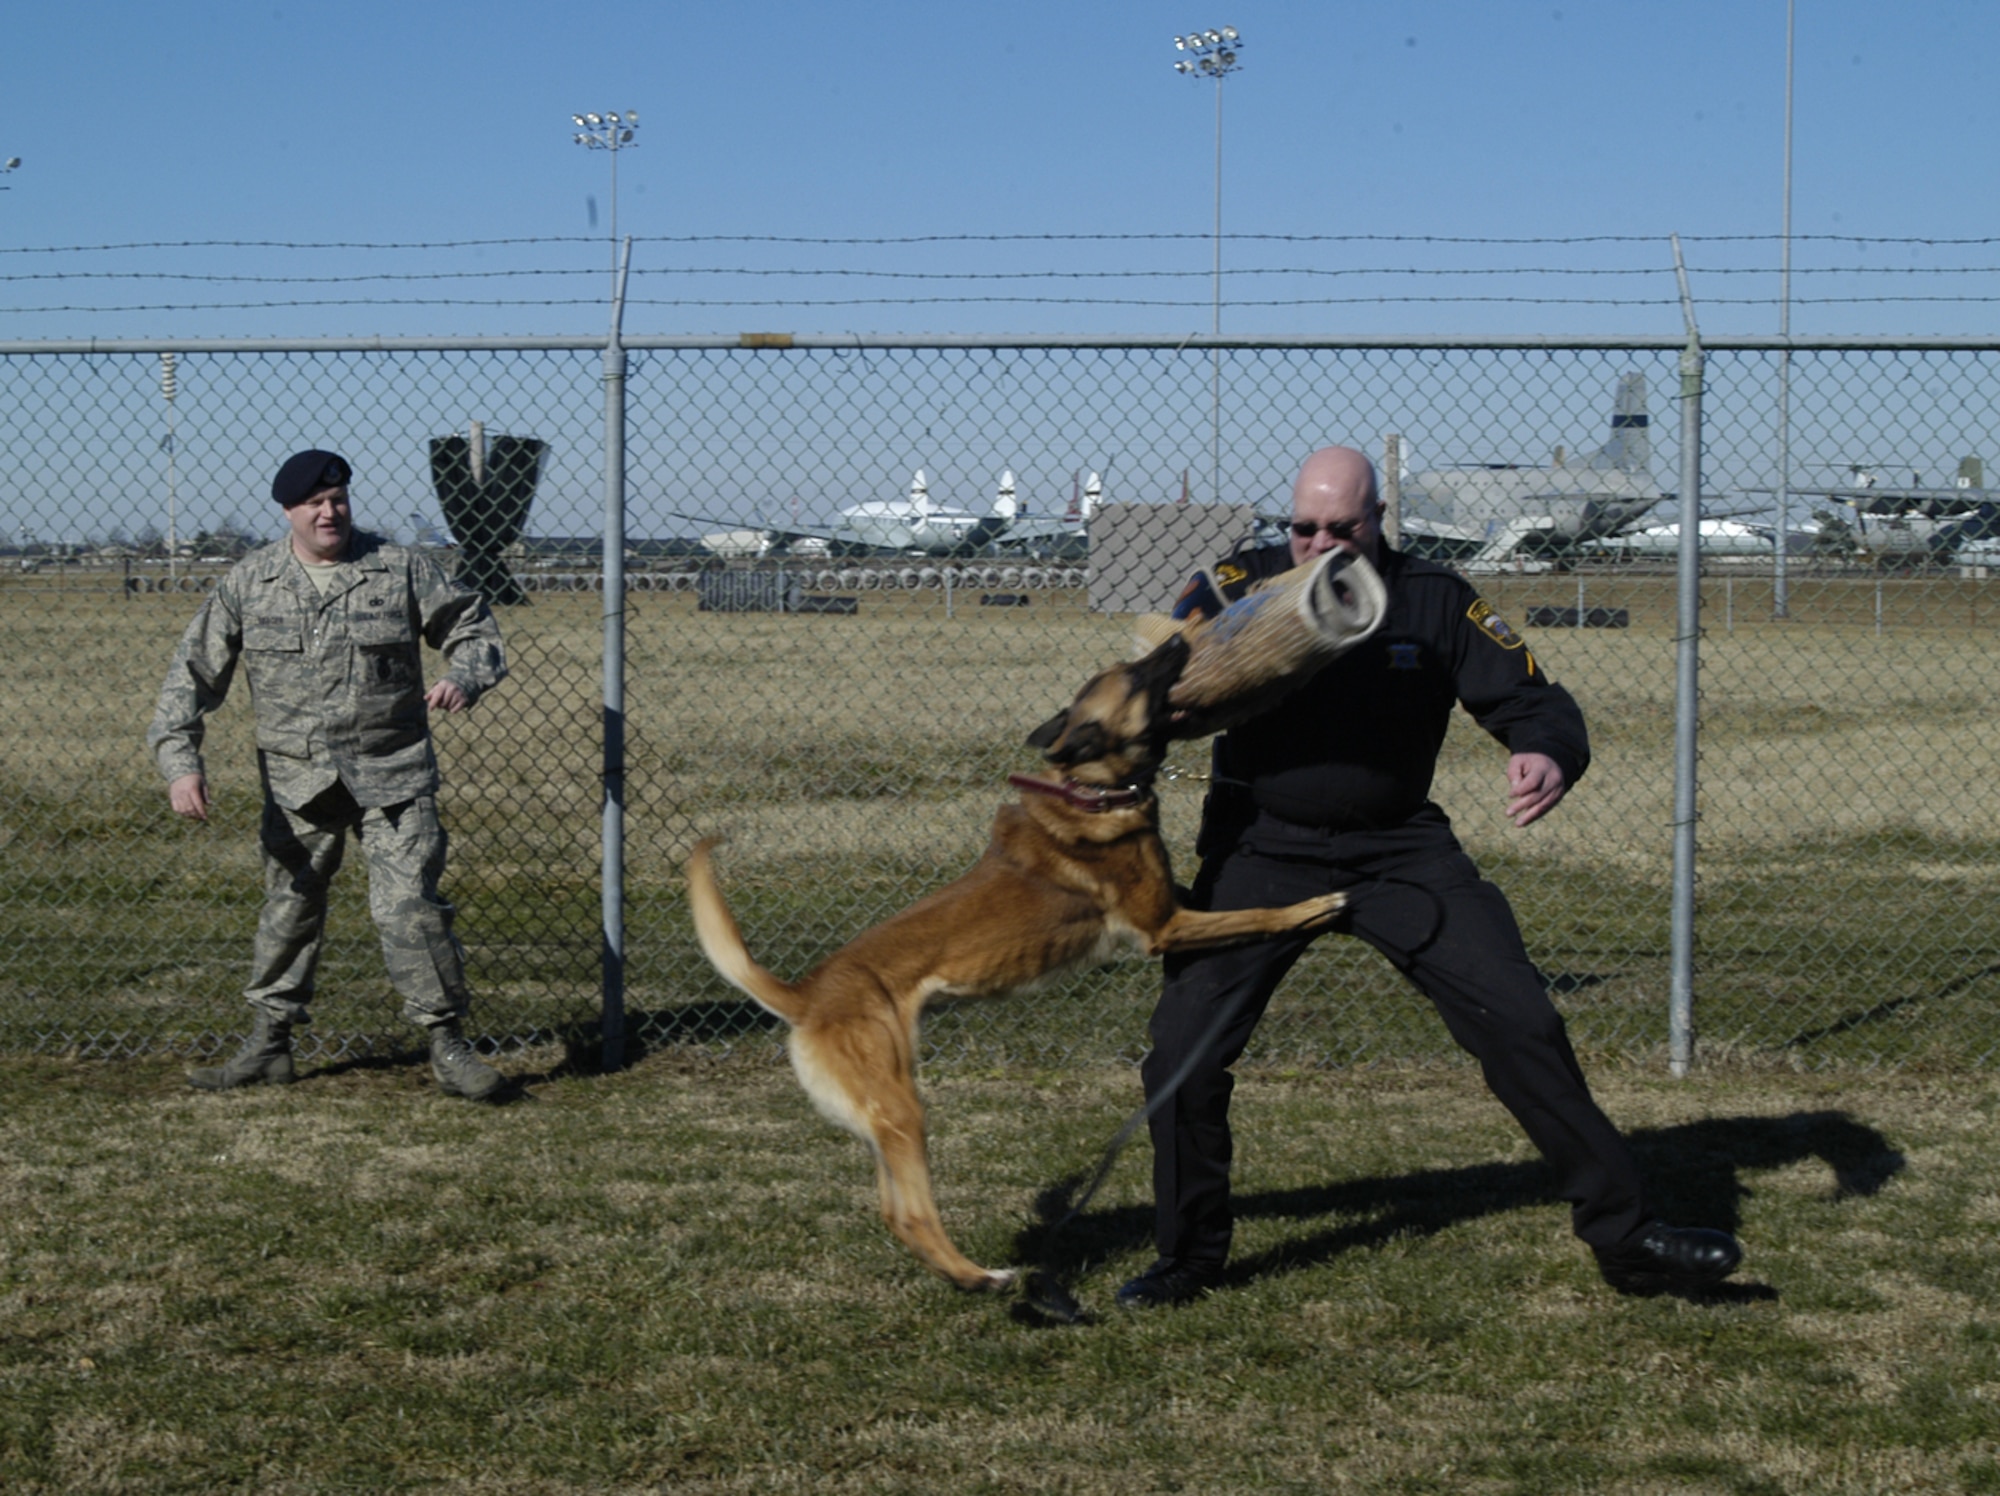 Staff Sgt. Scott Yeager, 436th Security Forces Squadron military working dog handler, oversees his MWD Renzo attack the bite sleeve worn by Deputy 1st Class Dennis Taylor, Wicomico County Sheriff’s Office, for a public demonstration Jan. 23. The event was designed to give the local media a glimpse of what the dogs can do. (U.S. Air Force photo/Airman 1st Class Shen-Chia Chu)